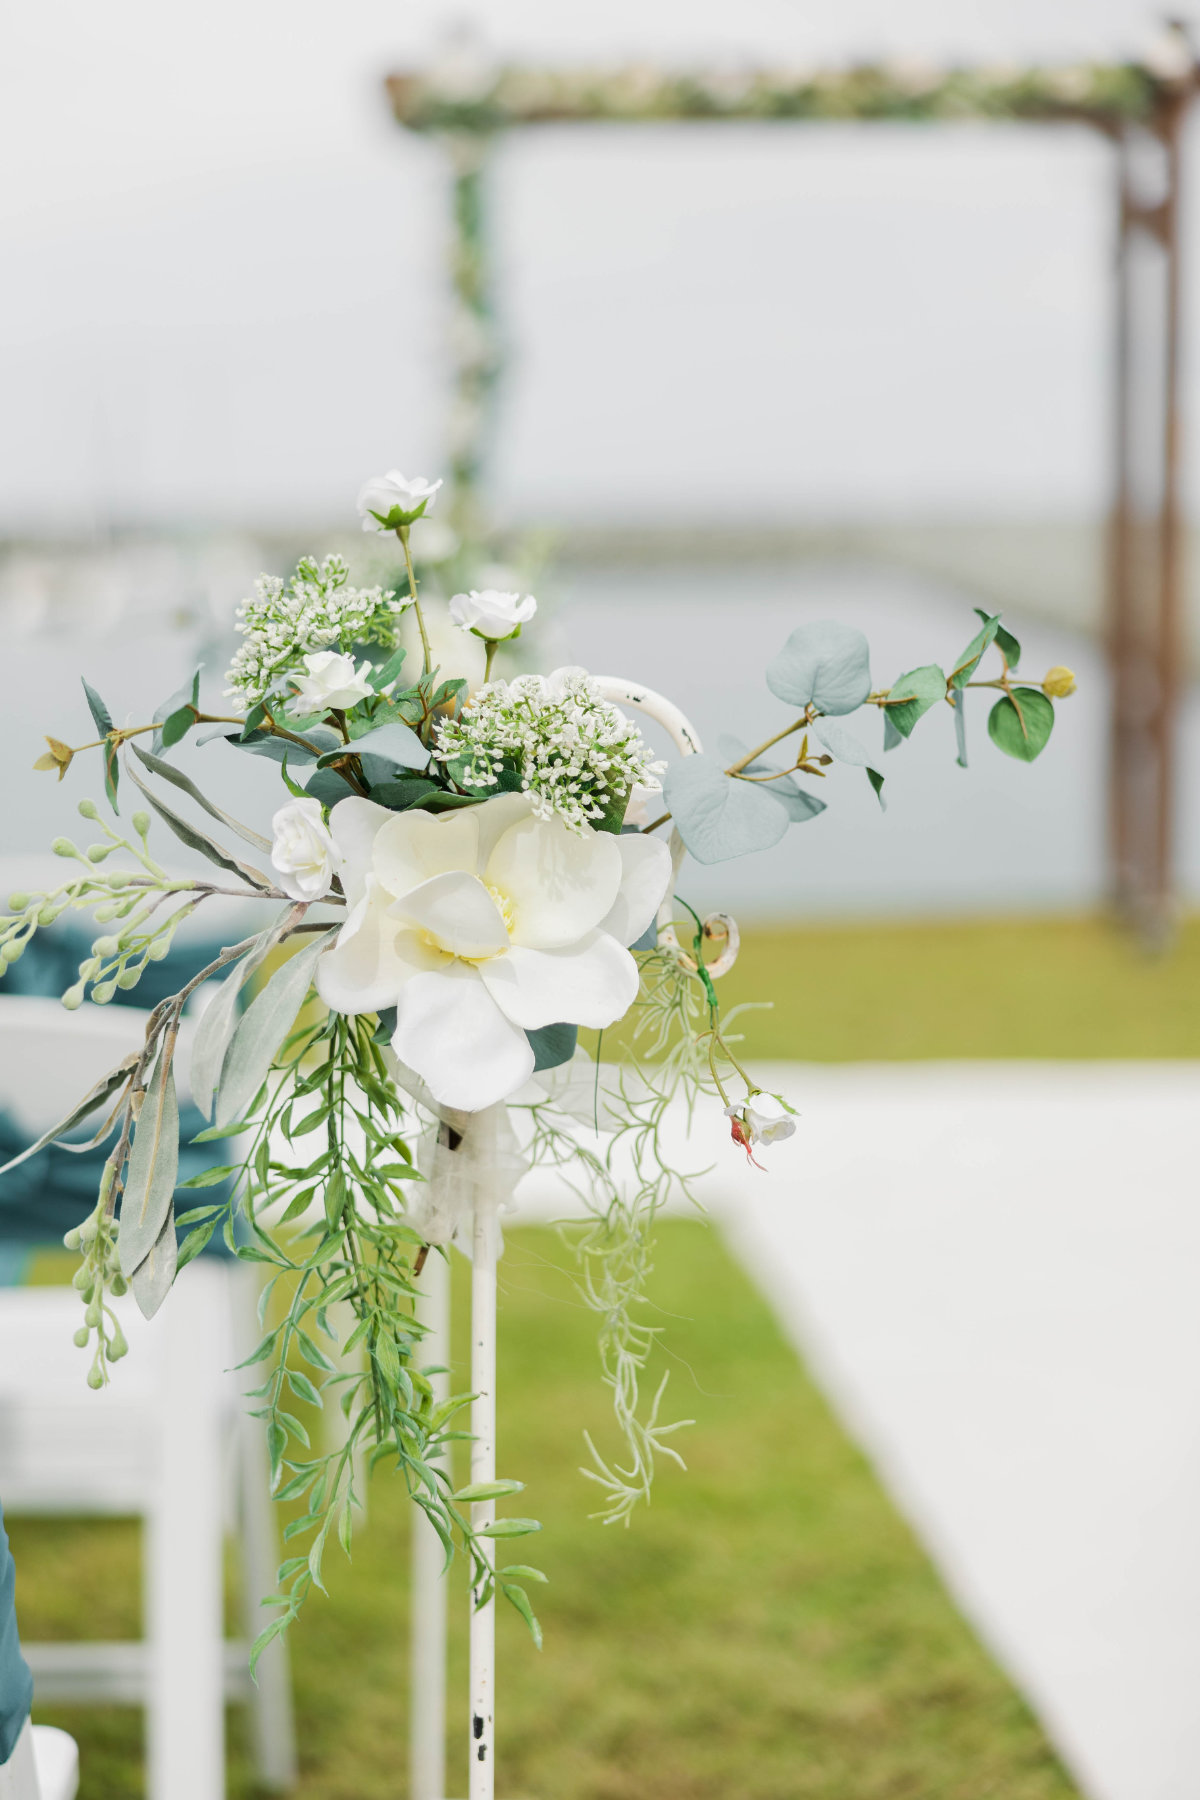 Keirra and Andrew's Breakwater Bar and Restaurant wedding photographed by Alyce Holzy